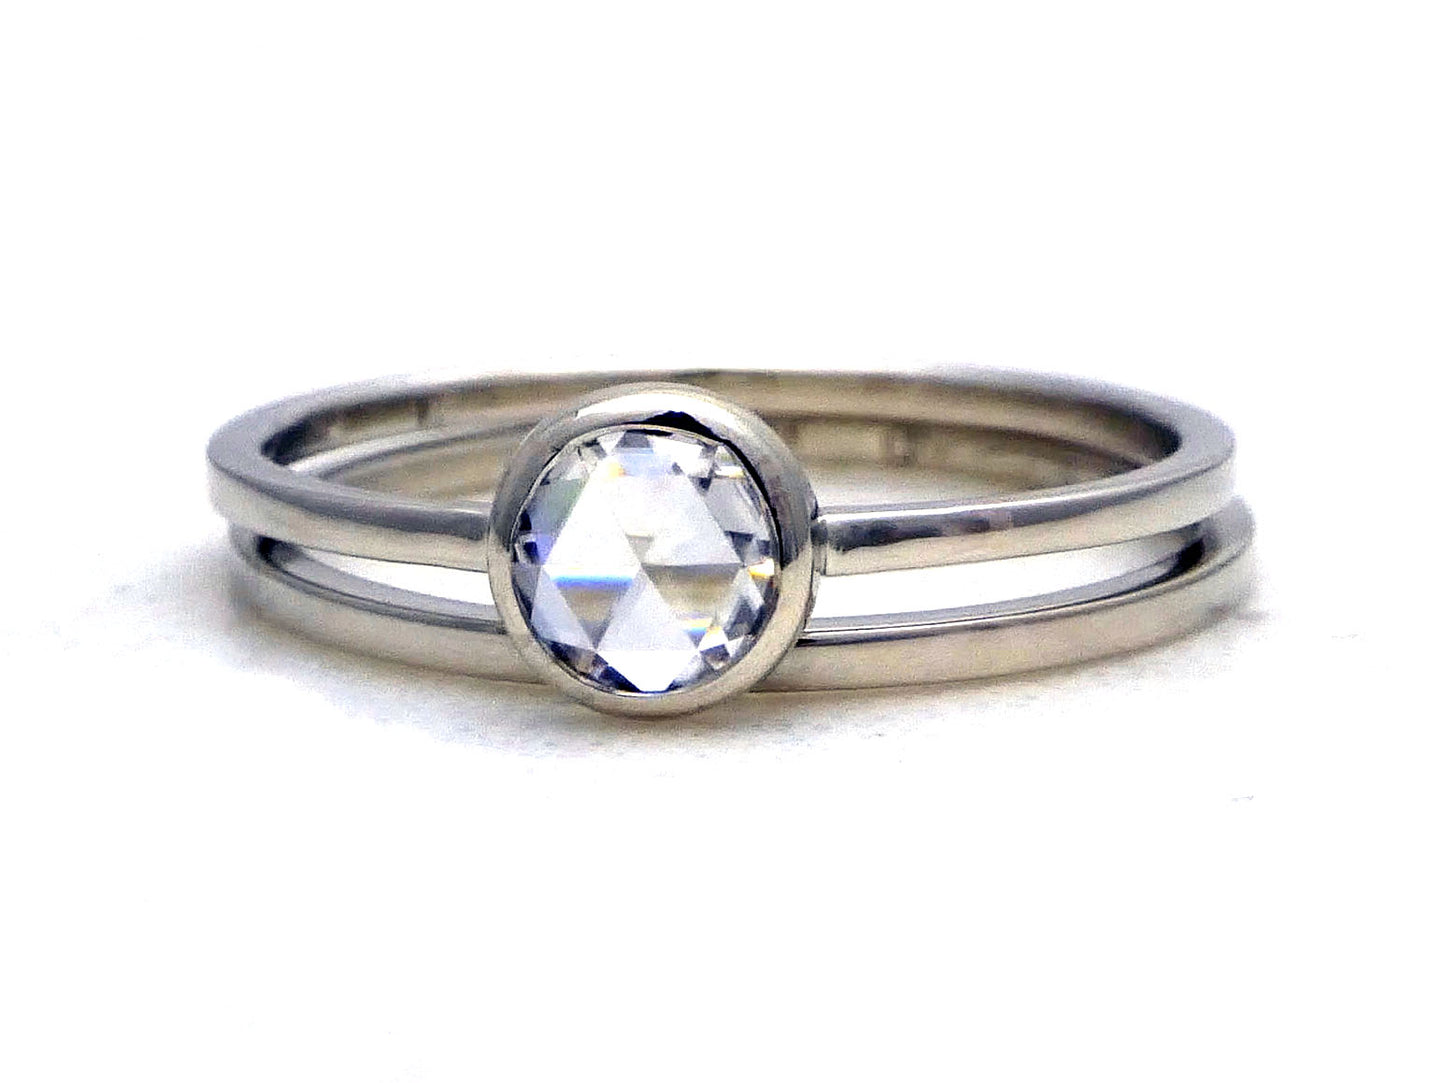 Rose Cut Moissanite Engagement Ring in 14k Gold with a low round bezel and slim square band